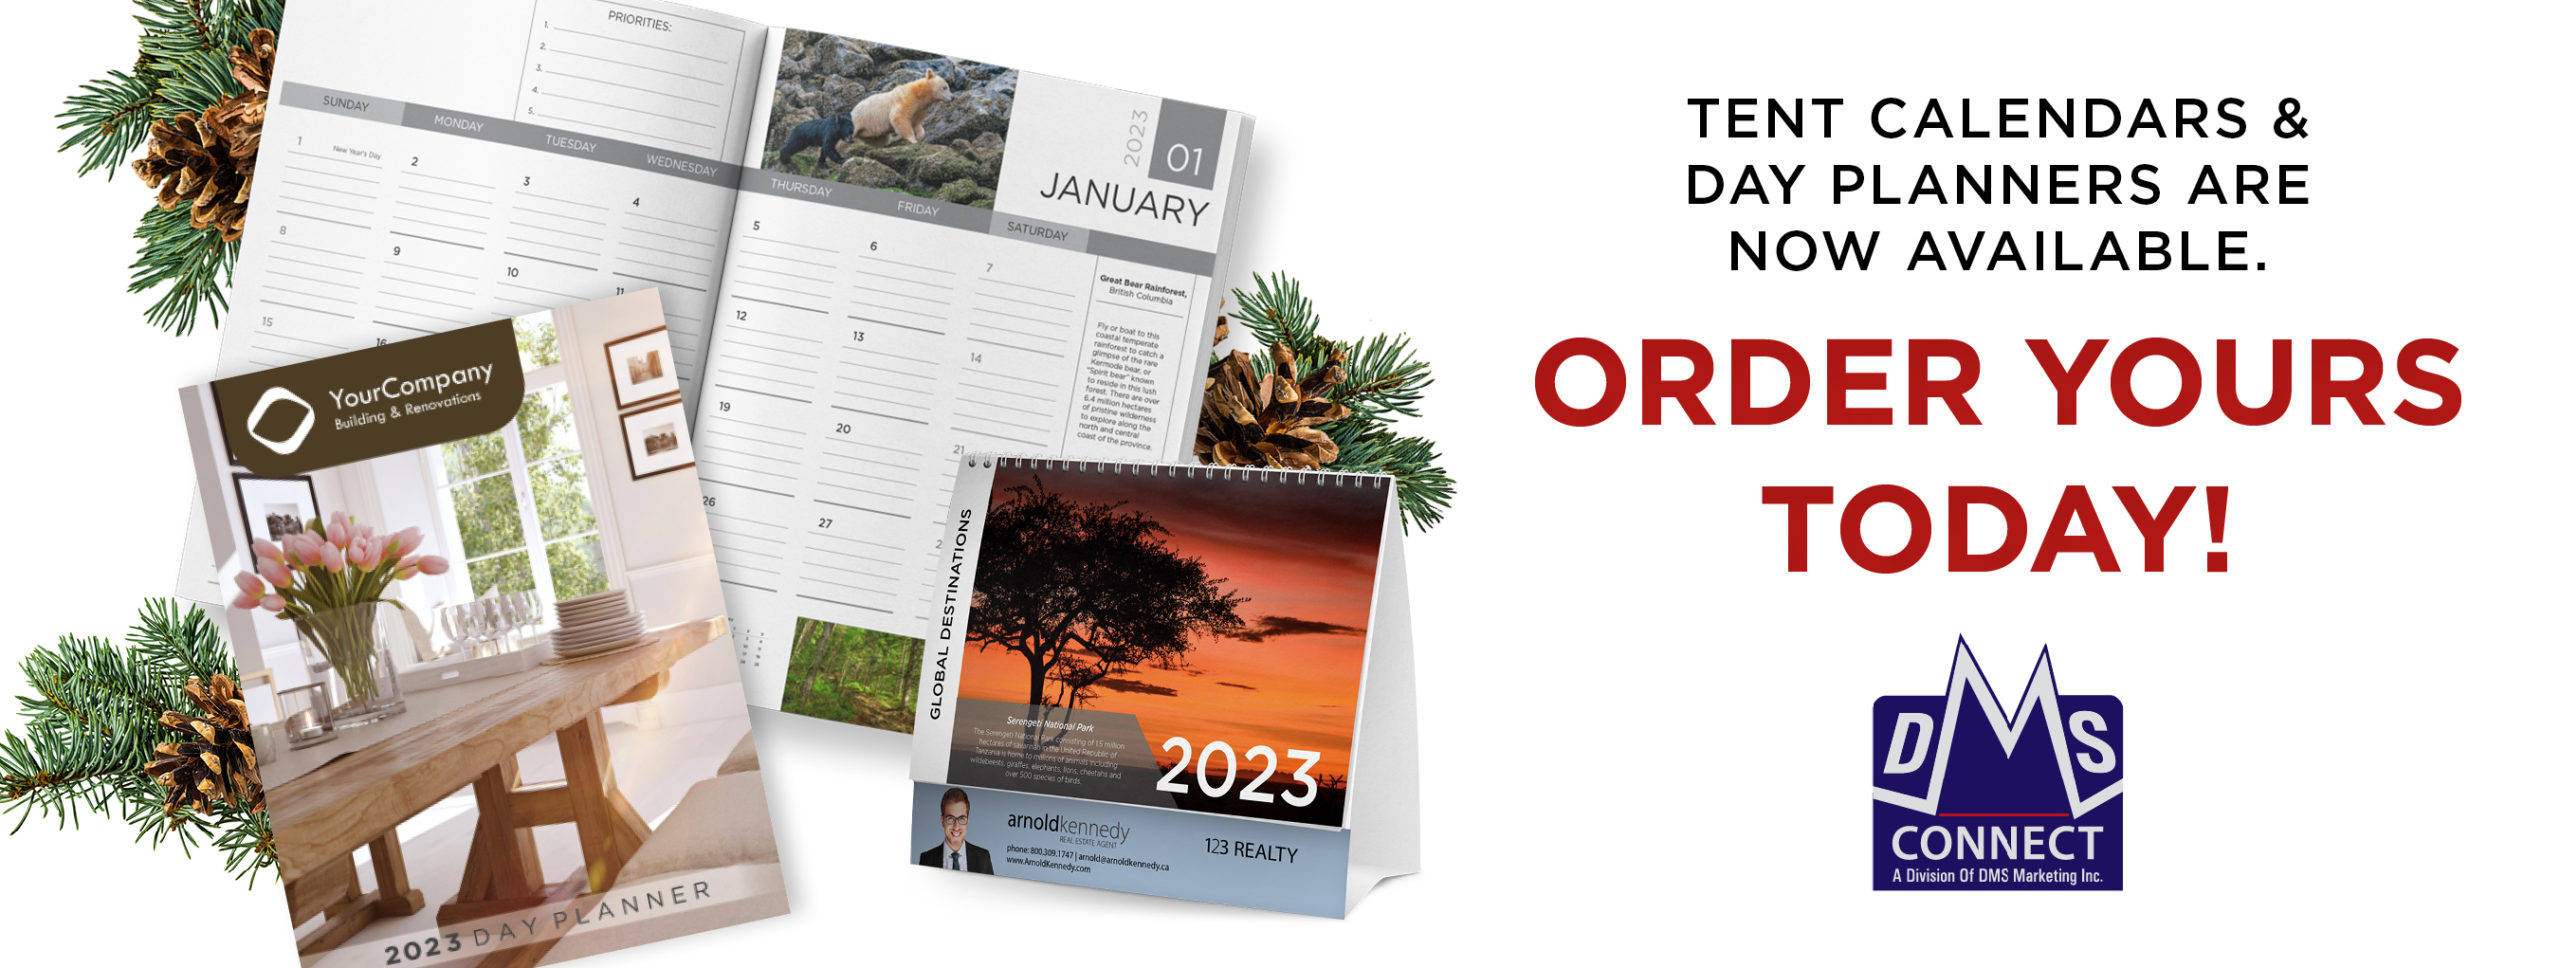 Day Planners and tent Calendars are now available